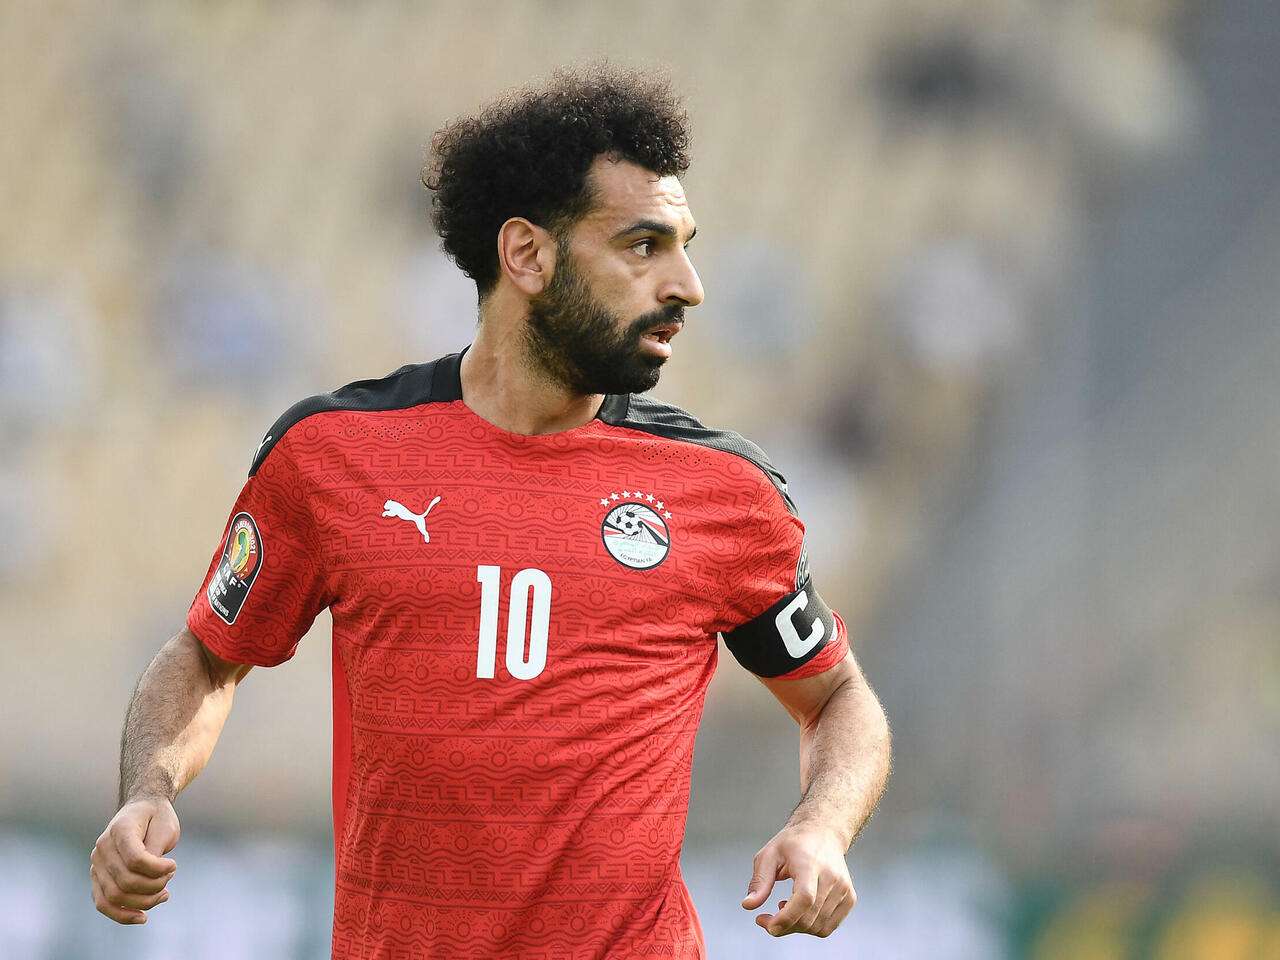 Egypt's forward Mohamed Salah reacts   during the Africa Cup of Nations (CAN) 2021 quarter-final football match between Egypt and Morocco at Stade Ahmadou Ahidjo in Yaounde on January 30, 2022. (Photo by CHARLY TRIBALLEAU / AFP)